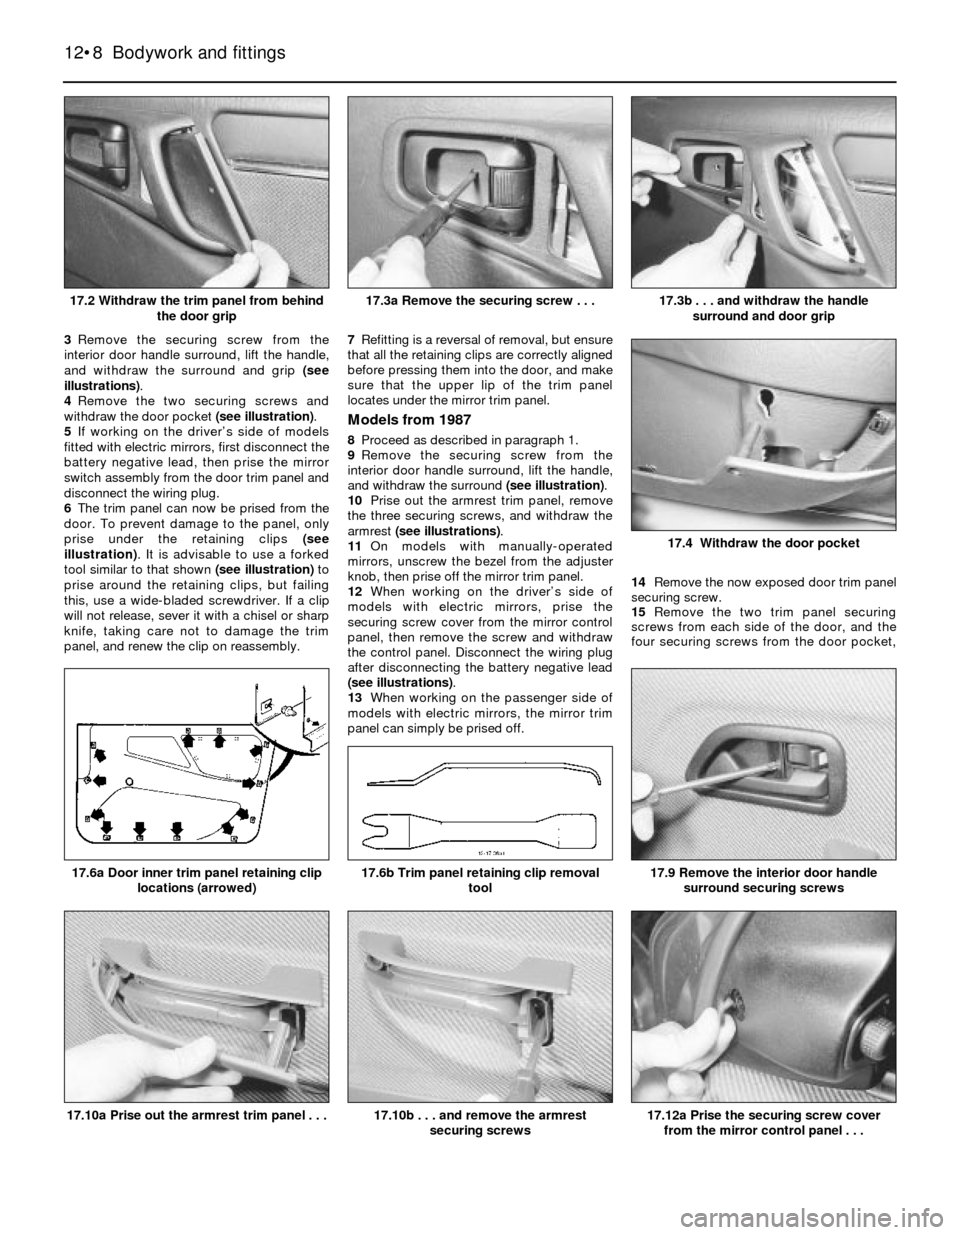 FORD SIERRA 1985 1.G Bodywork And Fittings Workshop Manual 3Remove the securing screw from the
interior door handle surround, lift the handle,
and withdraw the surround and grip (see
illustrations).
4Remove the two securing screws and
withdraw the door pocket